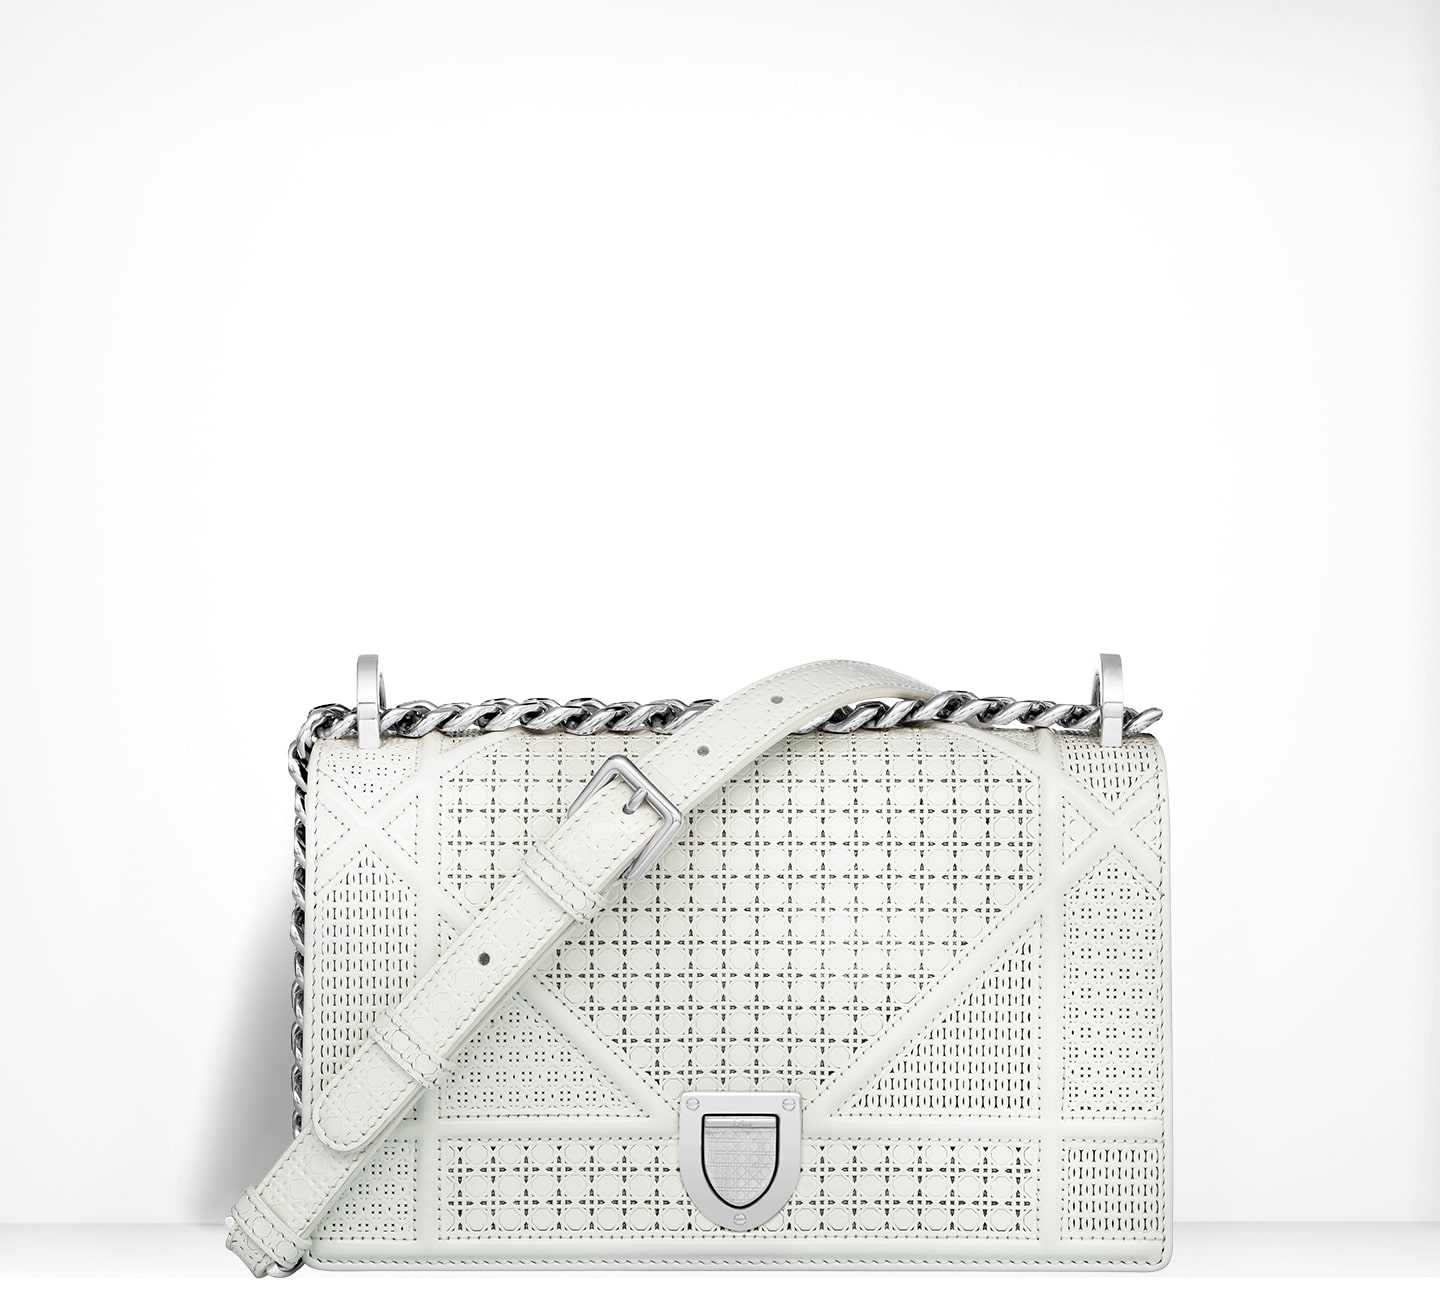 Diorama and Lady Dior Metallic Perforated Bags from Pre-Fall 2015 - Spotted  Fashion